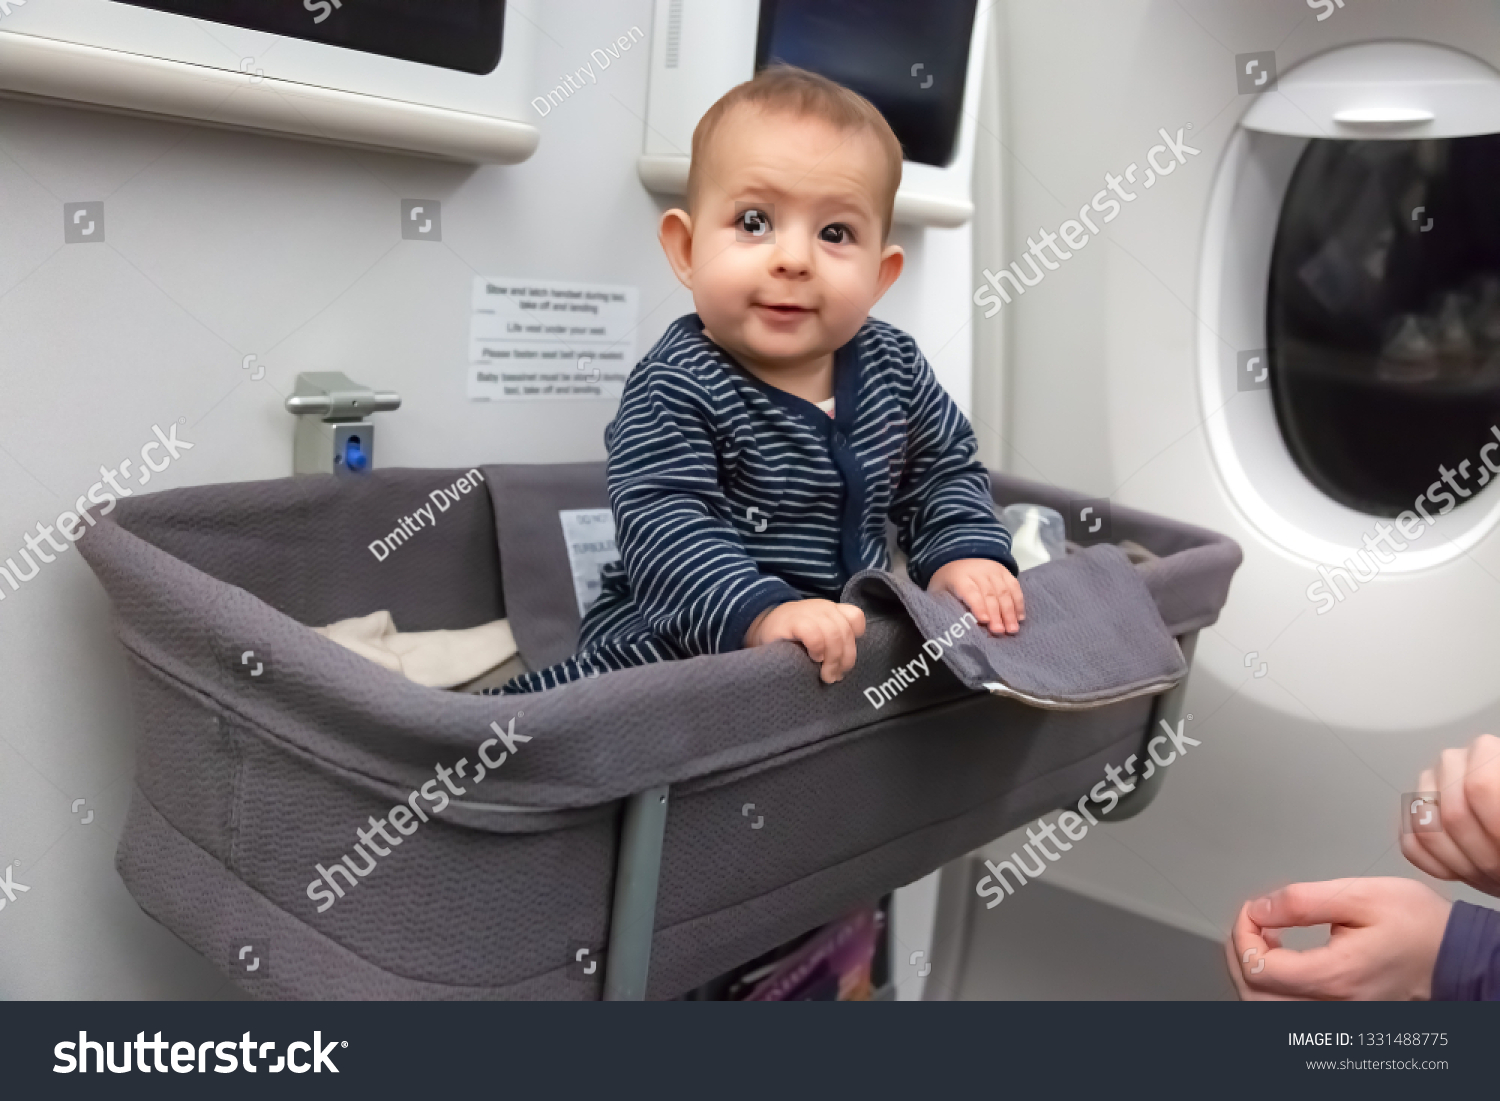 bassinet in aircraft